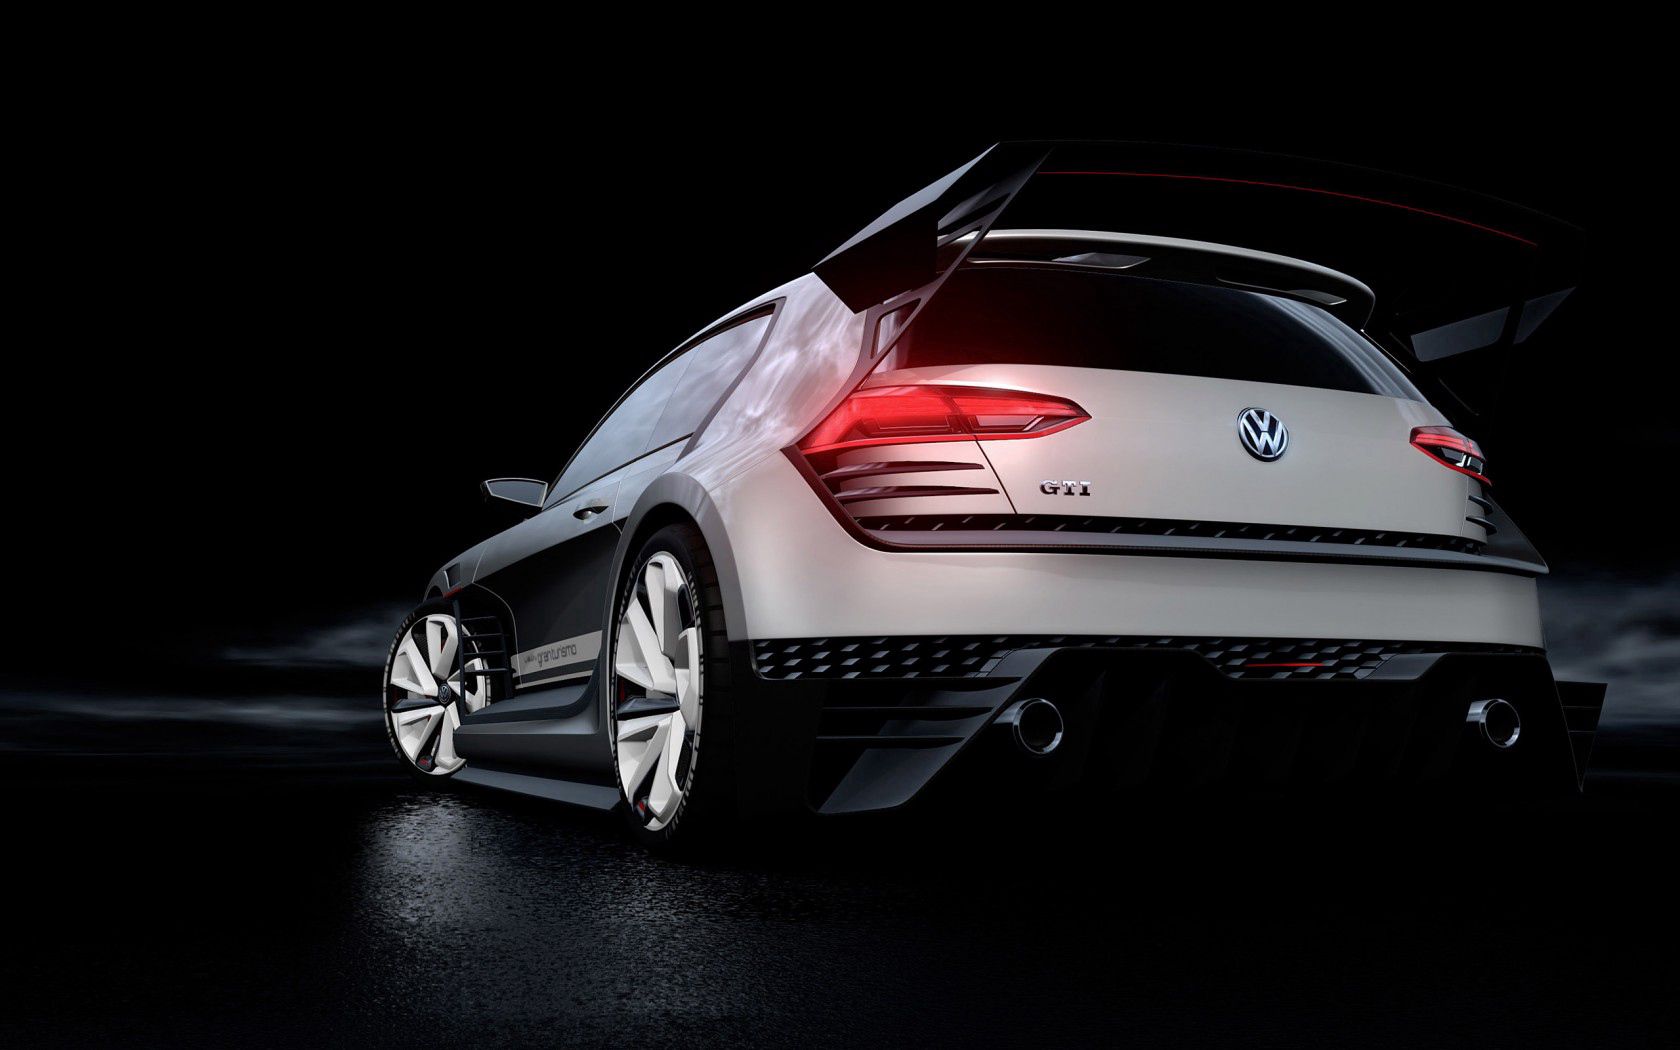 gti, back view, volkswagen, cars, concept, rear view, style HD wallpaper